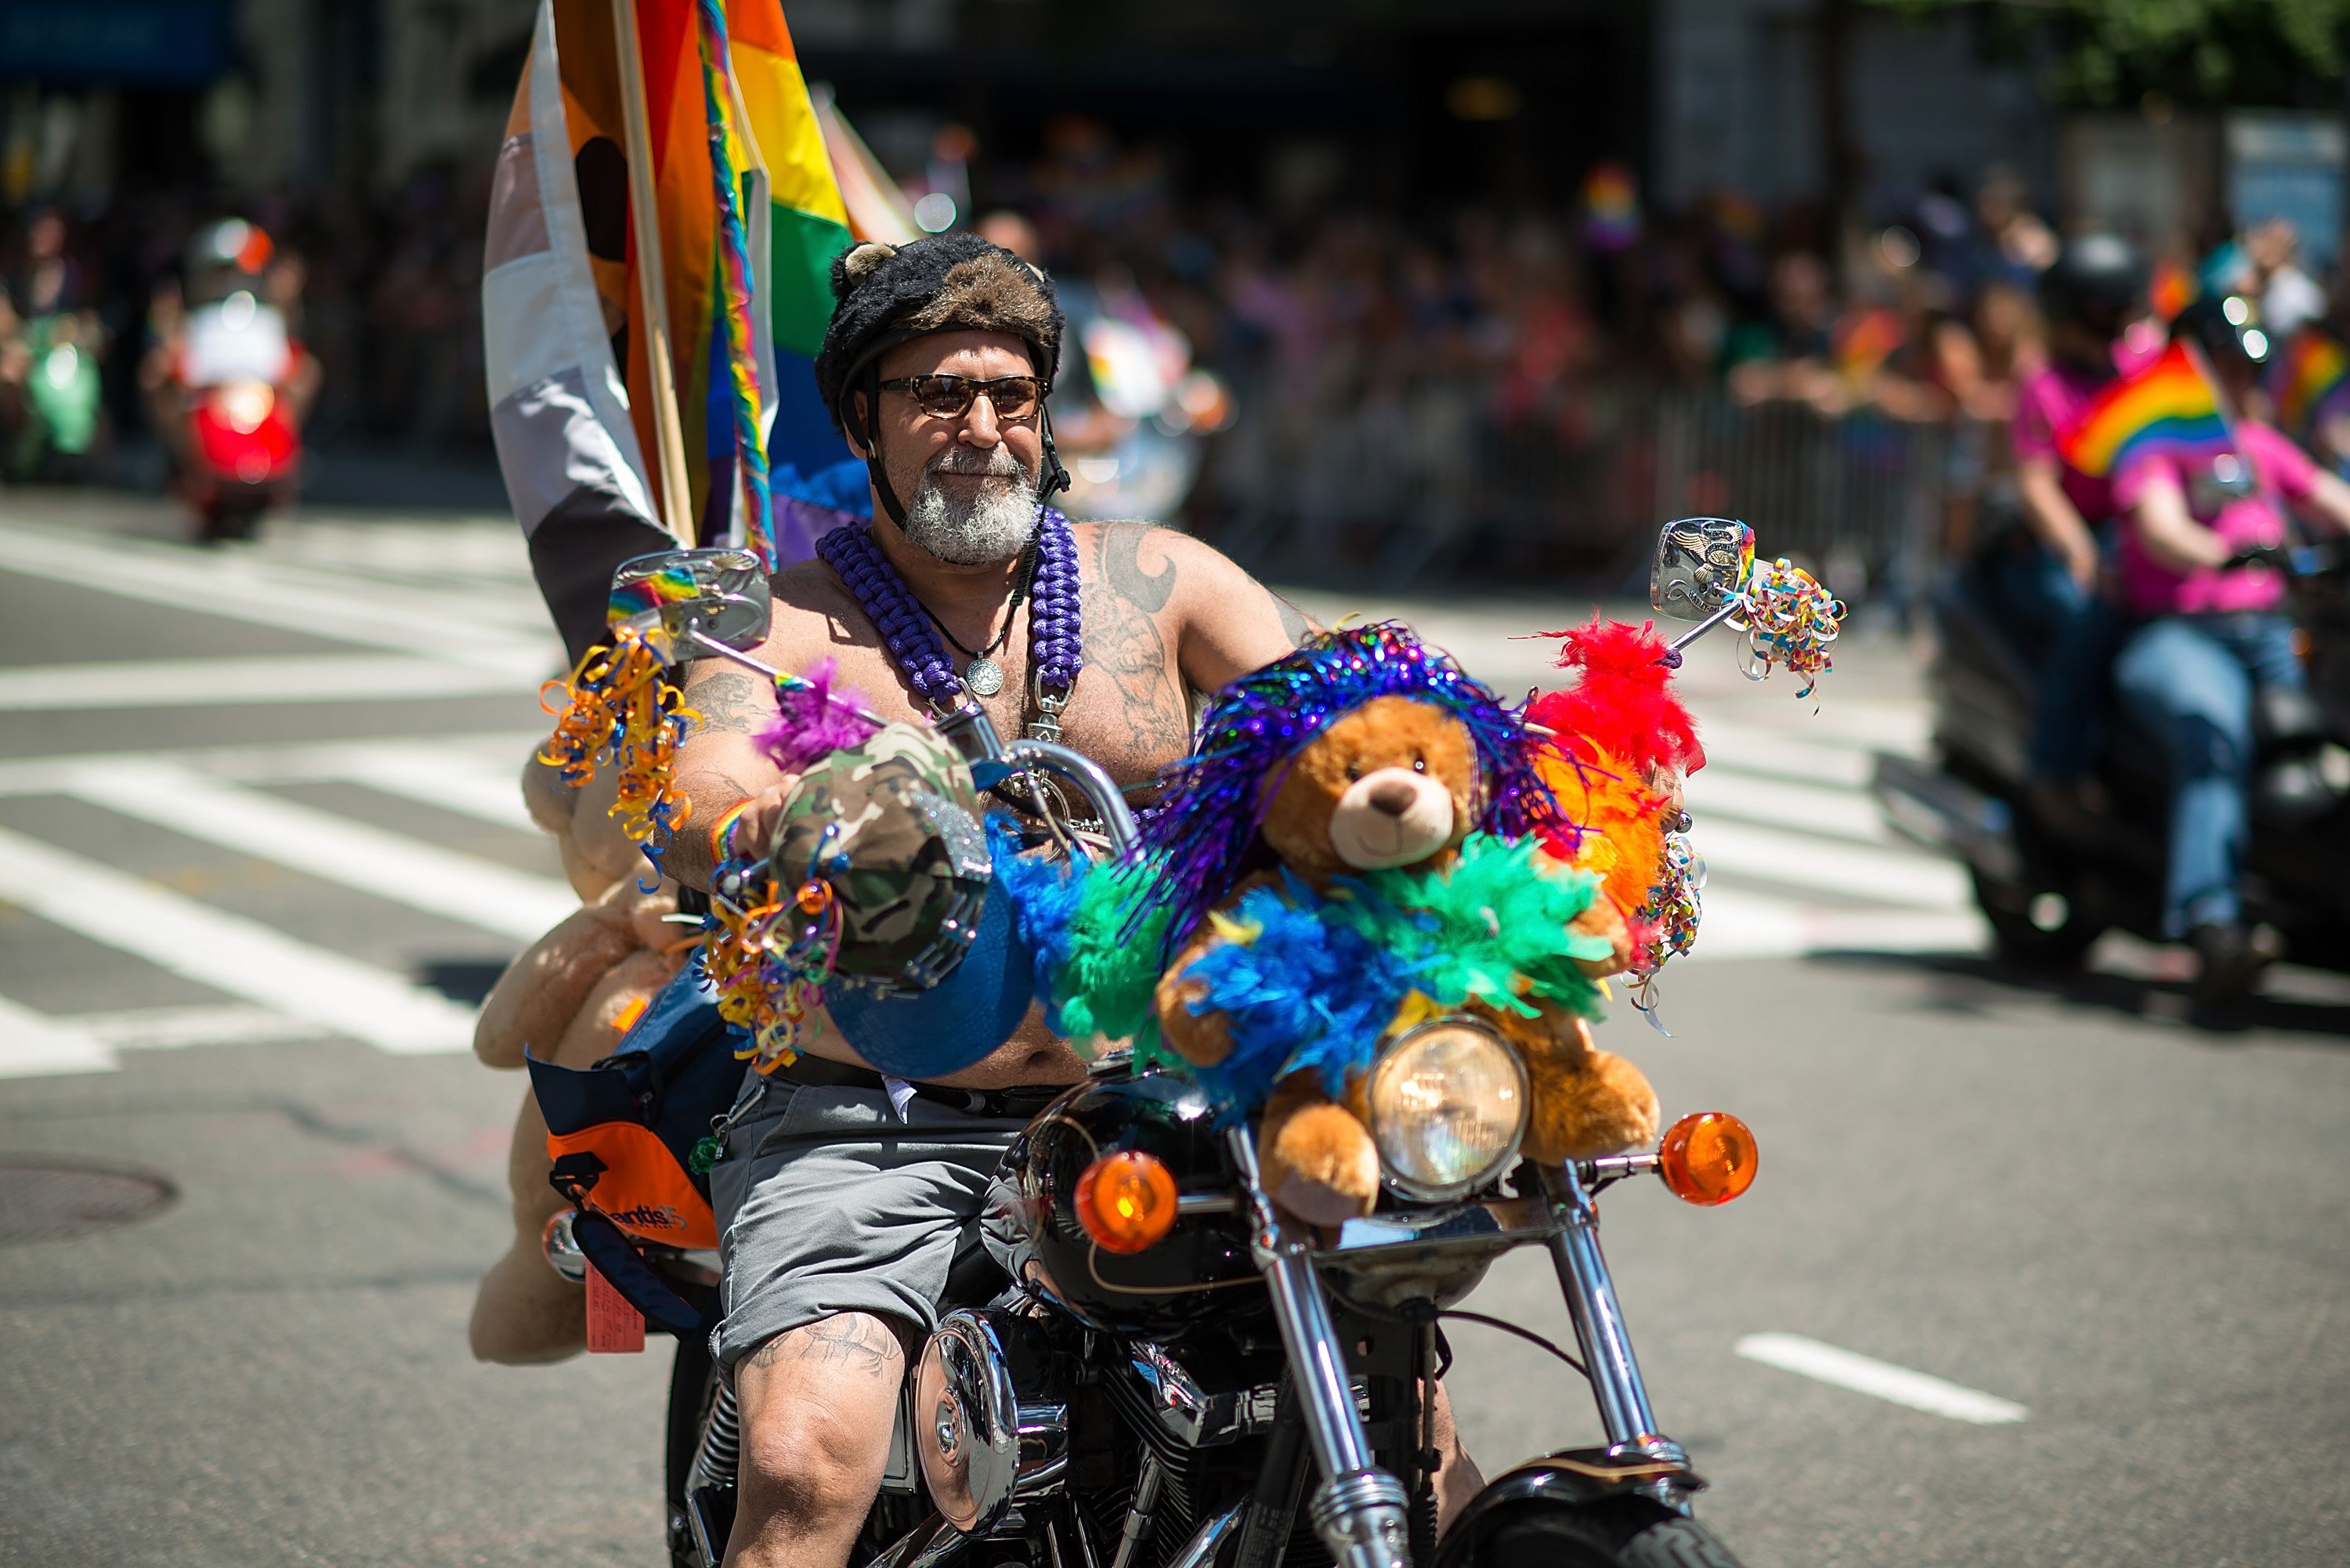 getty images gay pride nyc